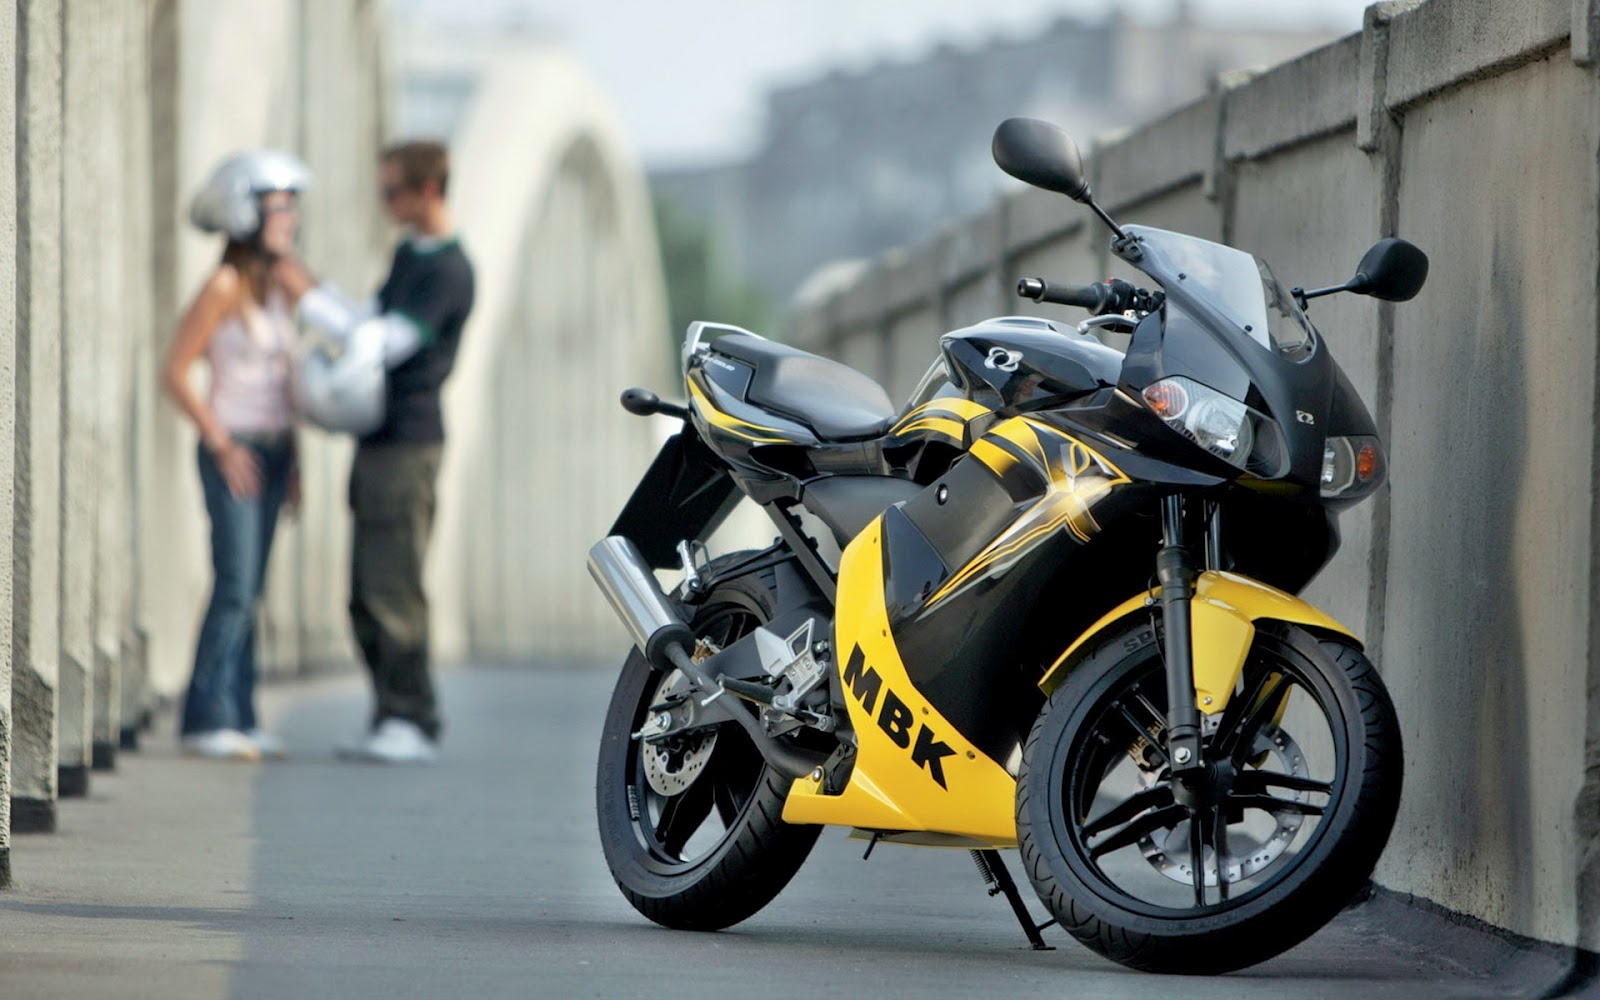 hd bikes wallpapers for android,land vehicle,vehicle,motorcycle,motor vehicle,car